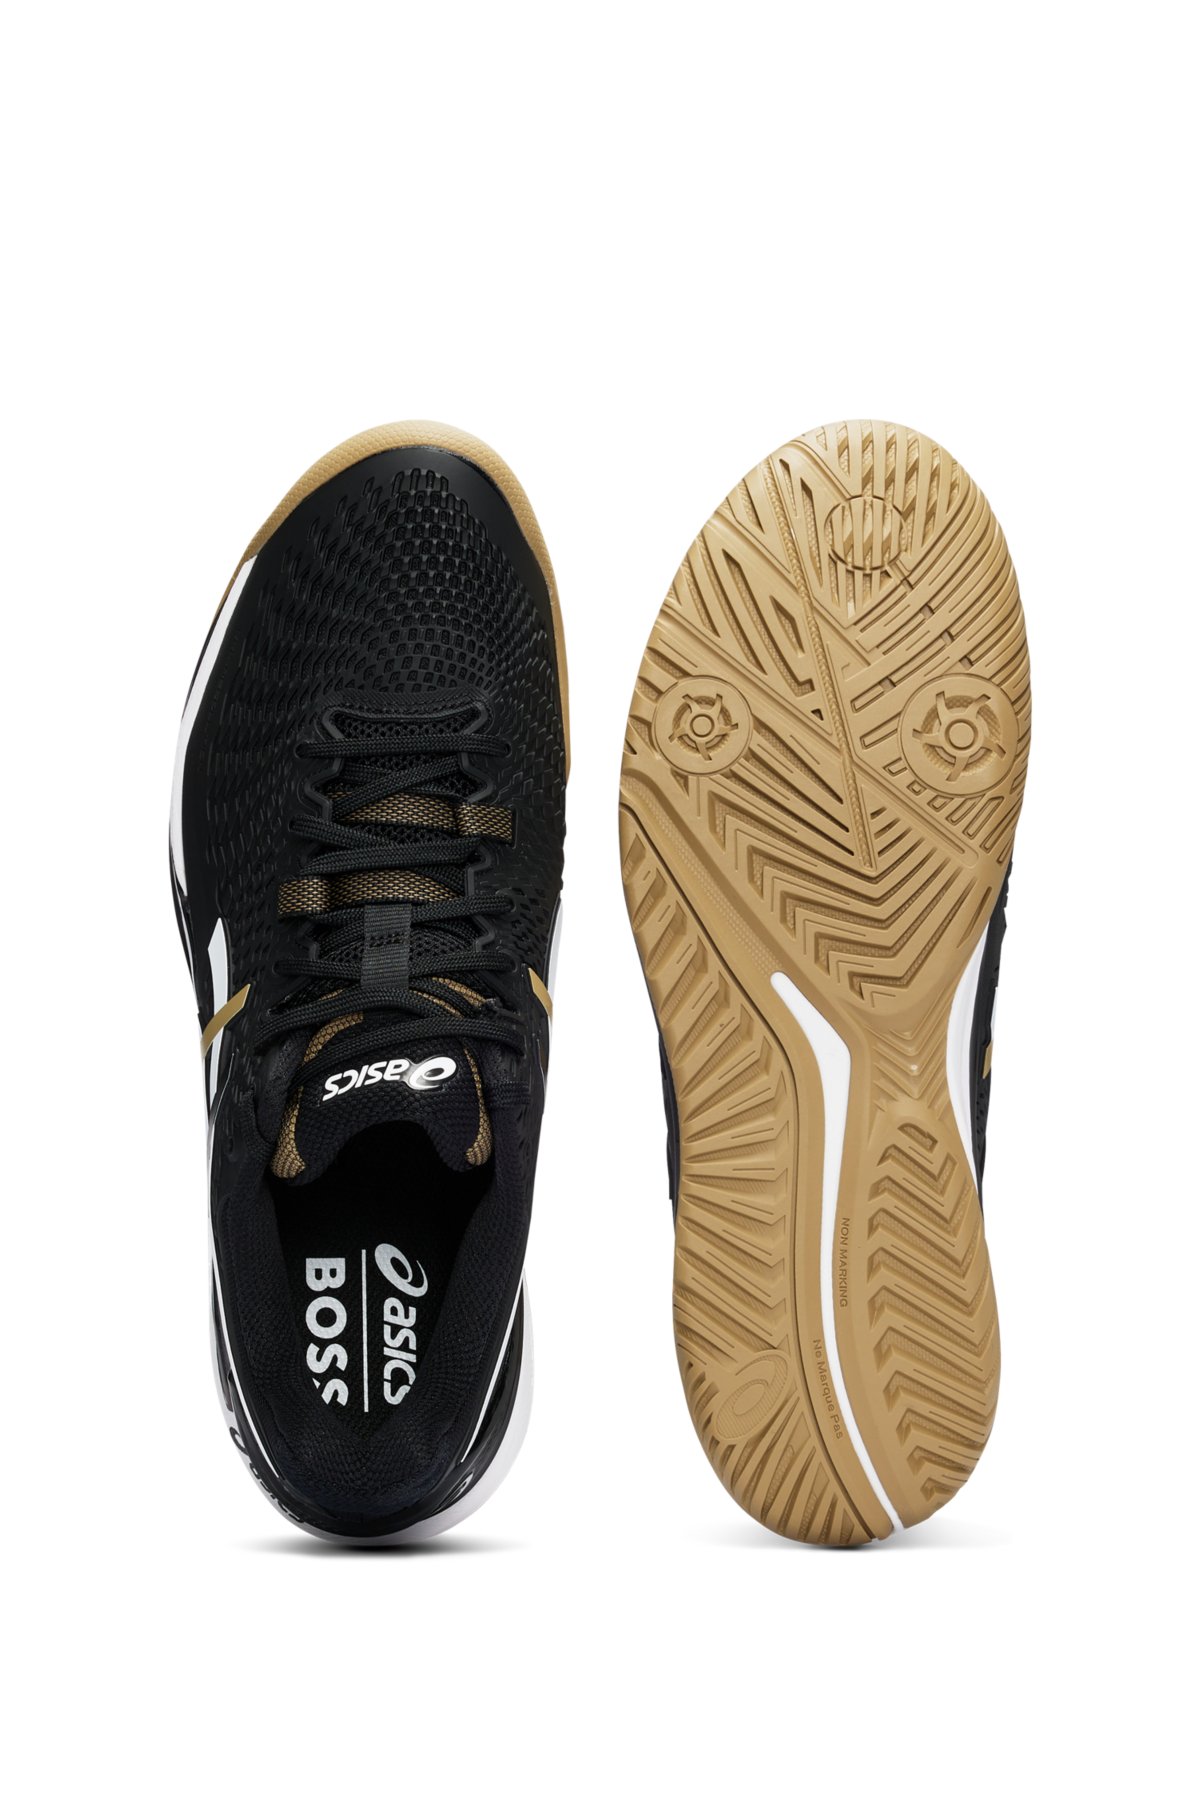 ASICS teams up with BOSS to launch limited edition Gel-Resolution 9  trainers